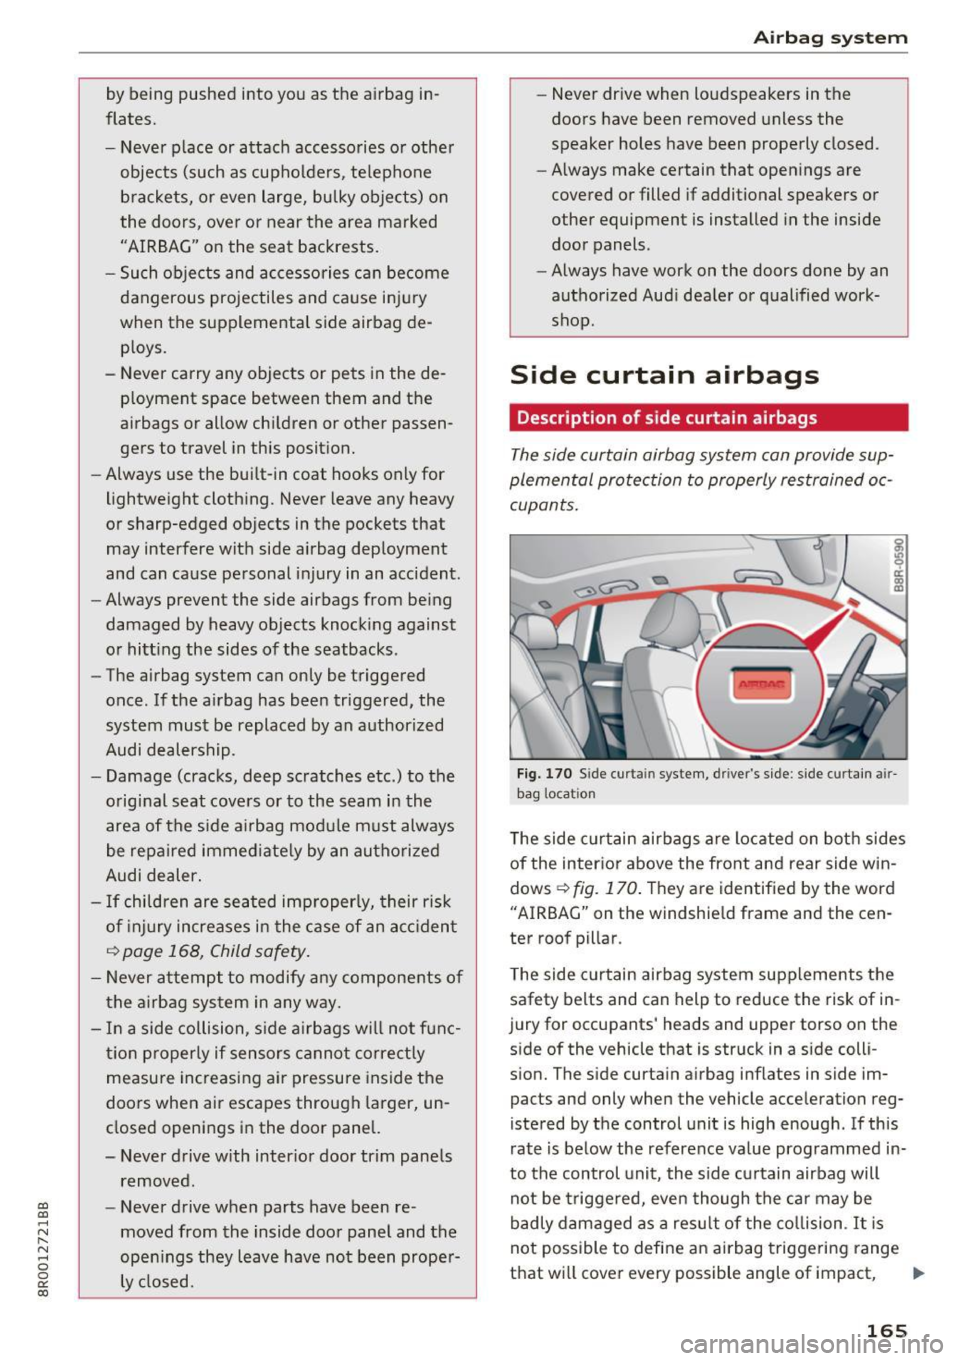 AUDI Q5 2017  Owners Manual a, 
a, 
..... N r-­N ..... 0 0 
0: 
co 
by being  pushed  into  you  as  the  airbag  in­
flates. 
- Never  place  or  attach  accessories  or other  objects  (such  as  cupholders,  telephone 
brac